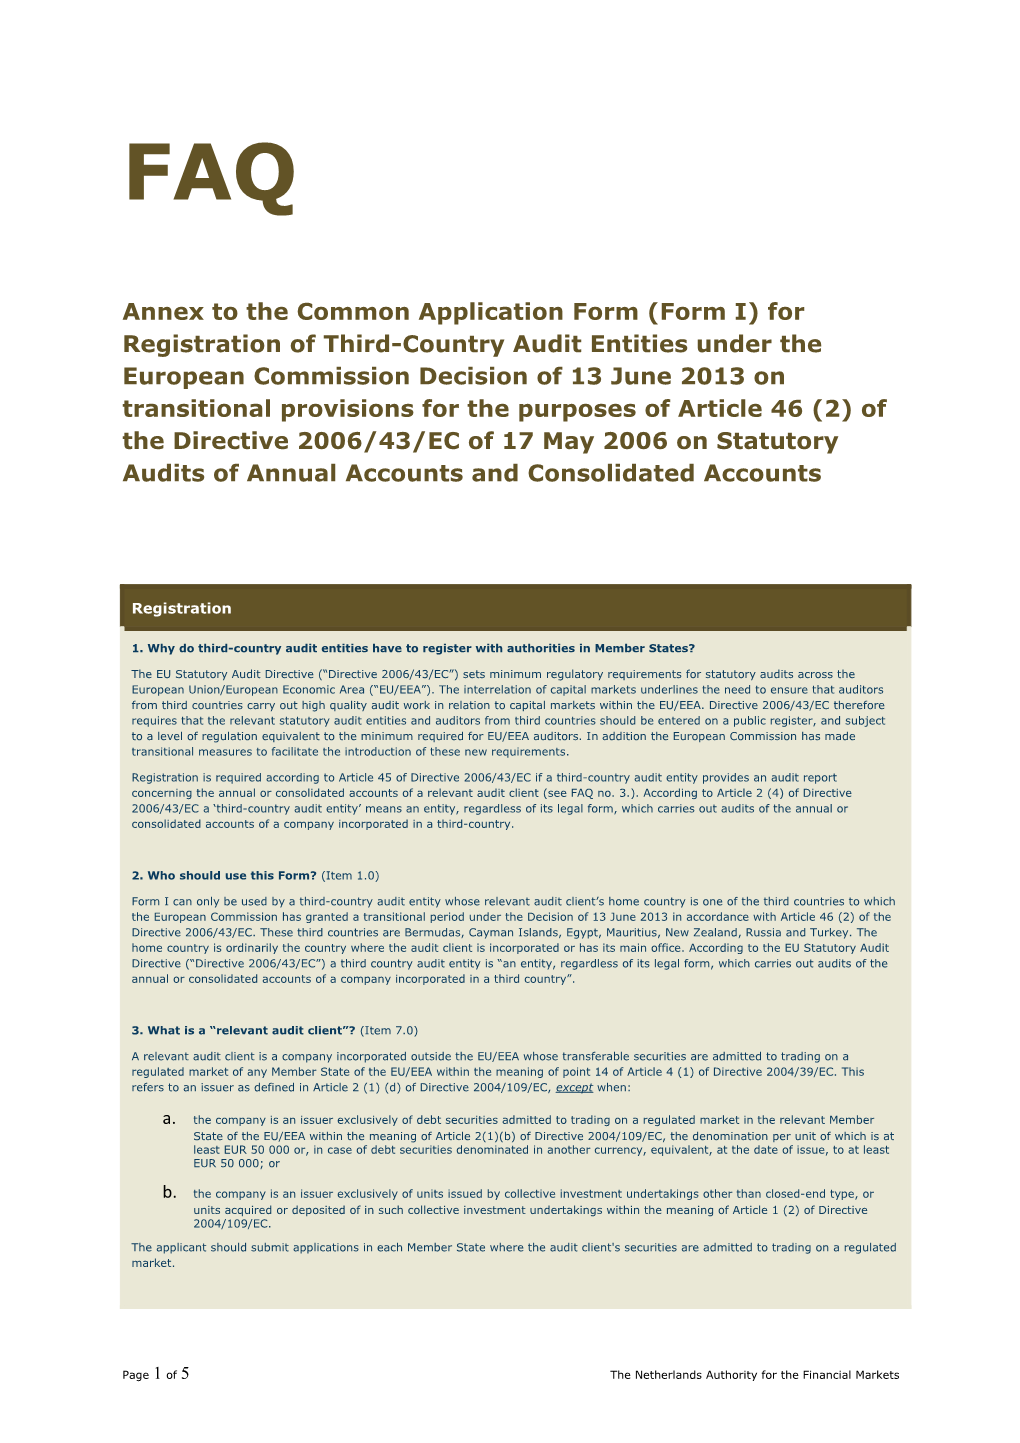 Annex to the Common Application Form (Form I) for Registration of Third-Country Audit